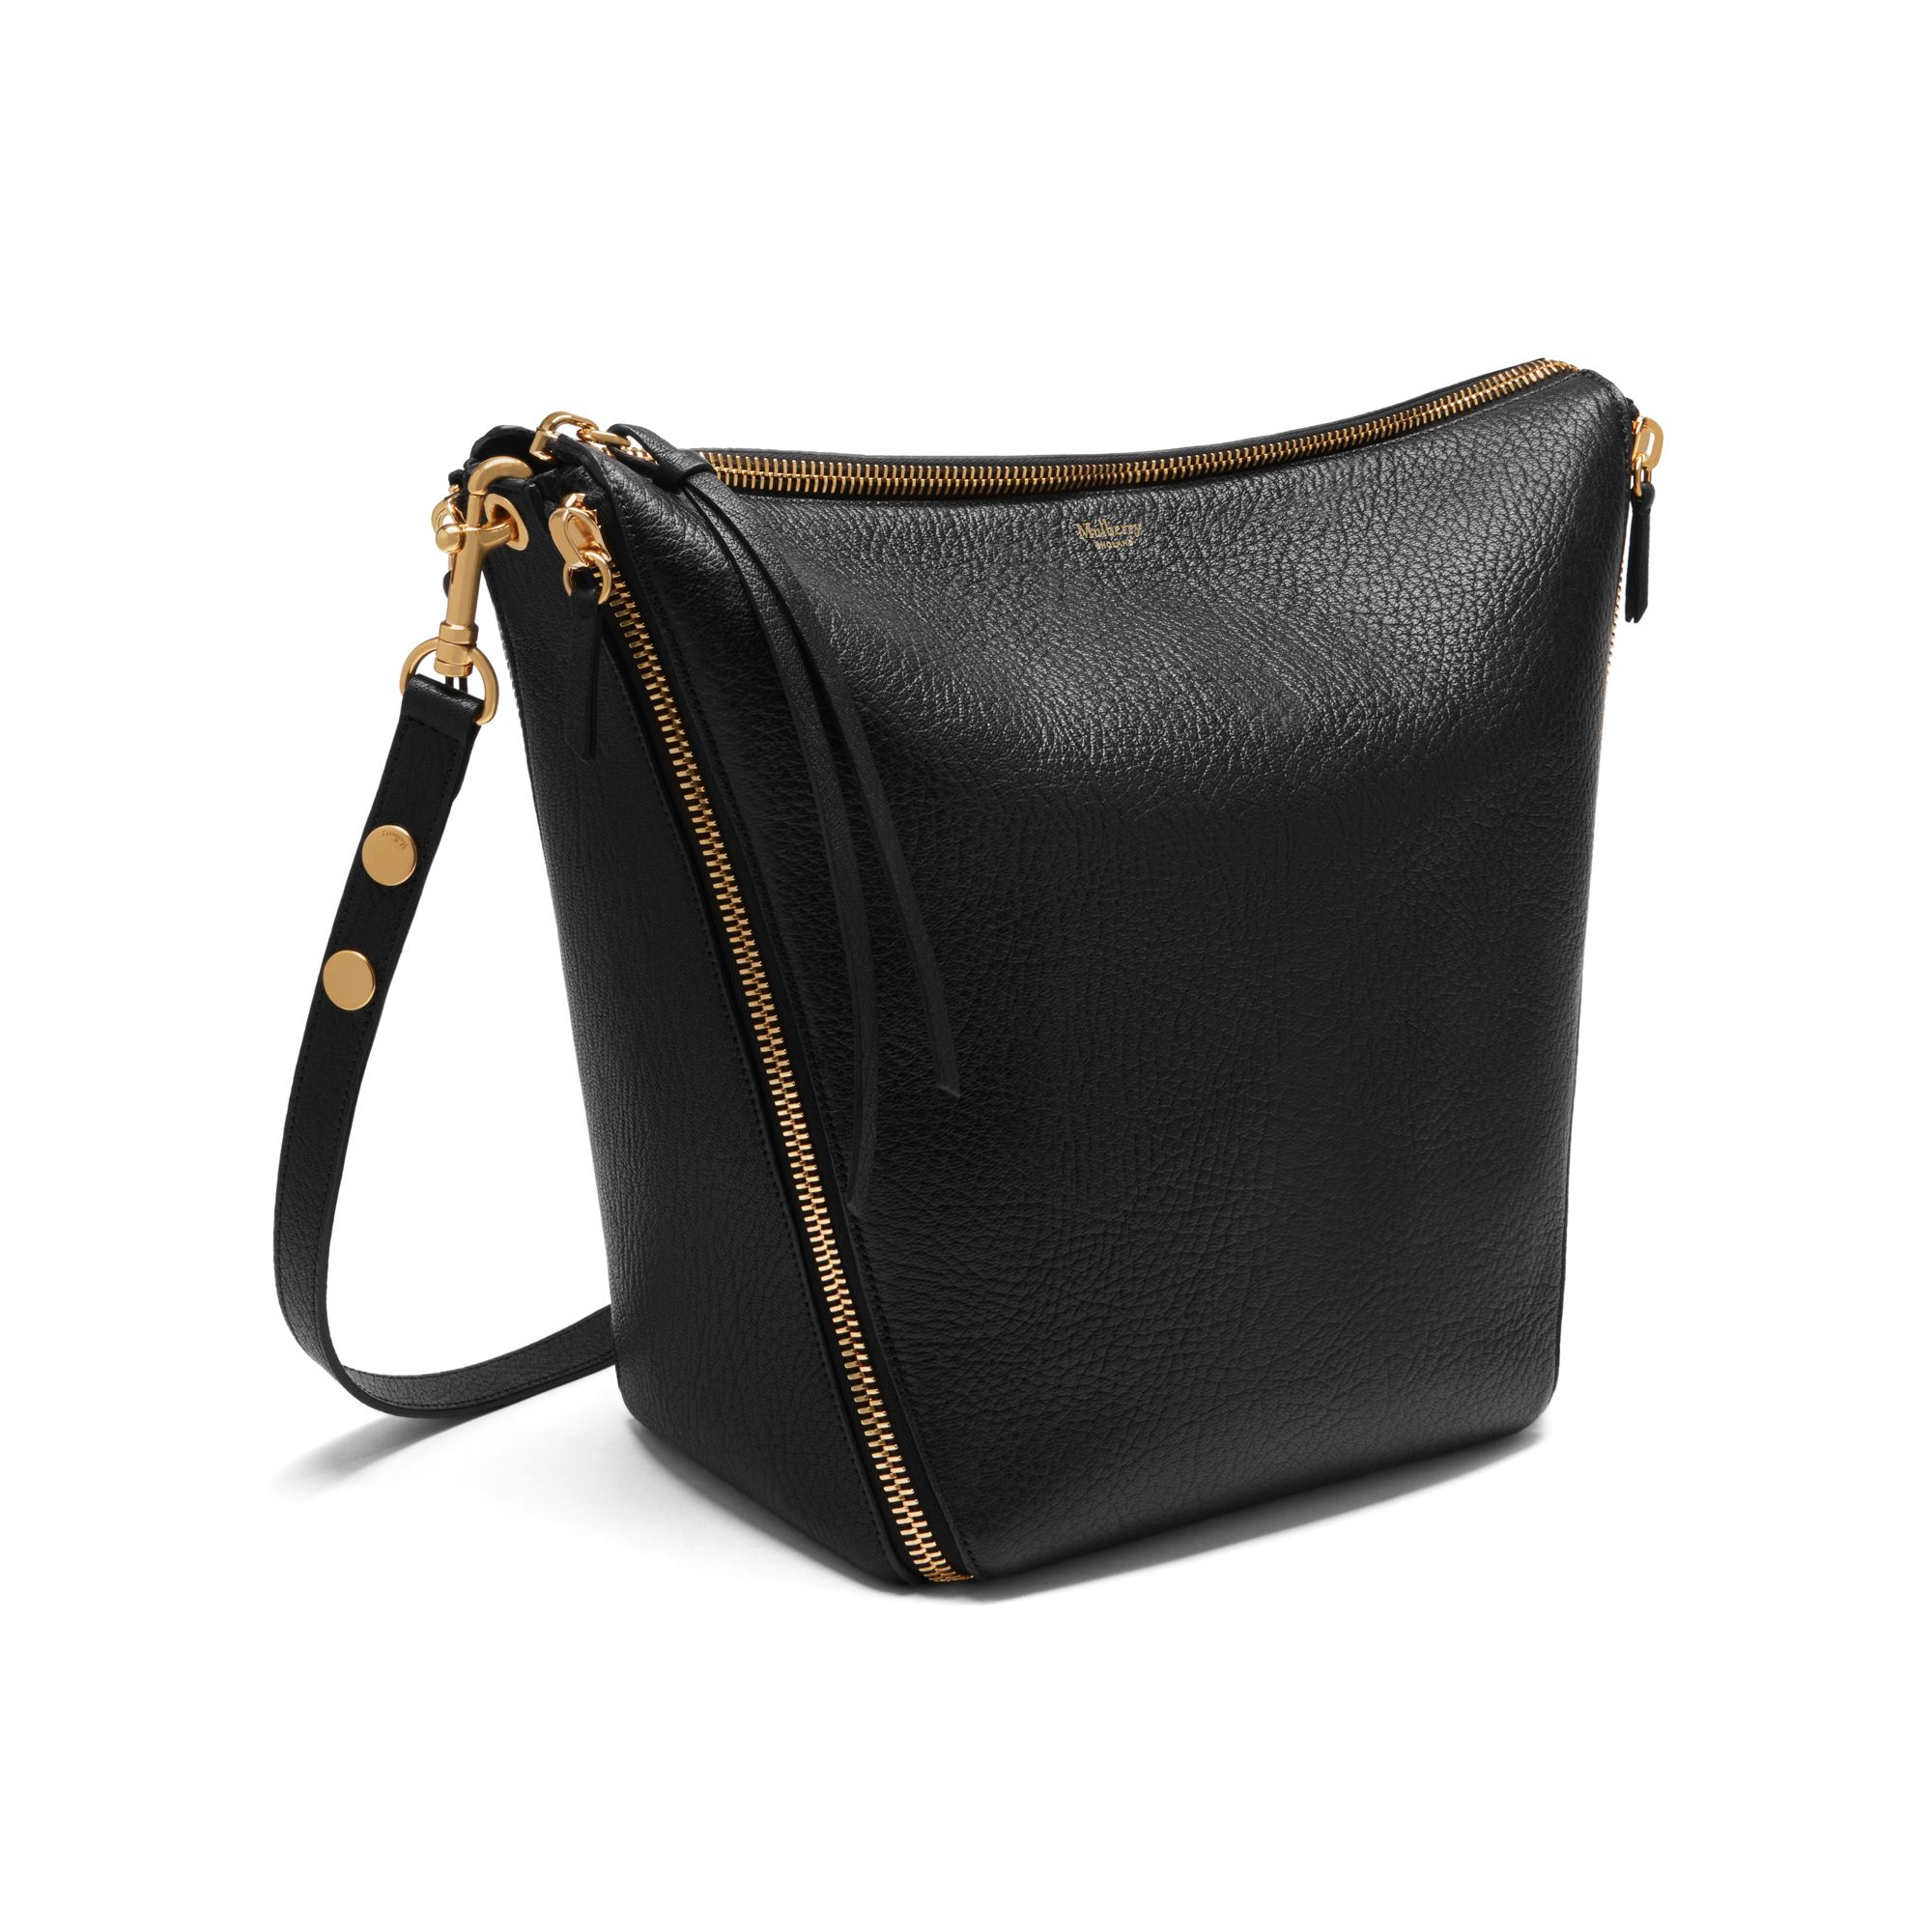 Mulberry Camden Leather Tote Bag in Black - Lyst